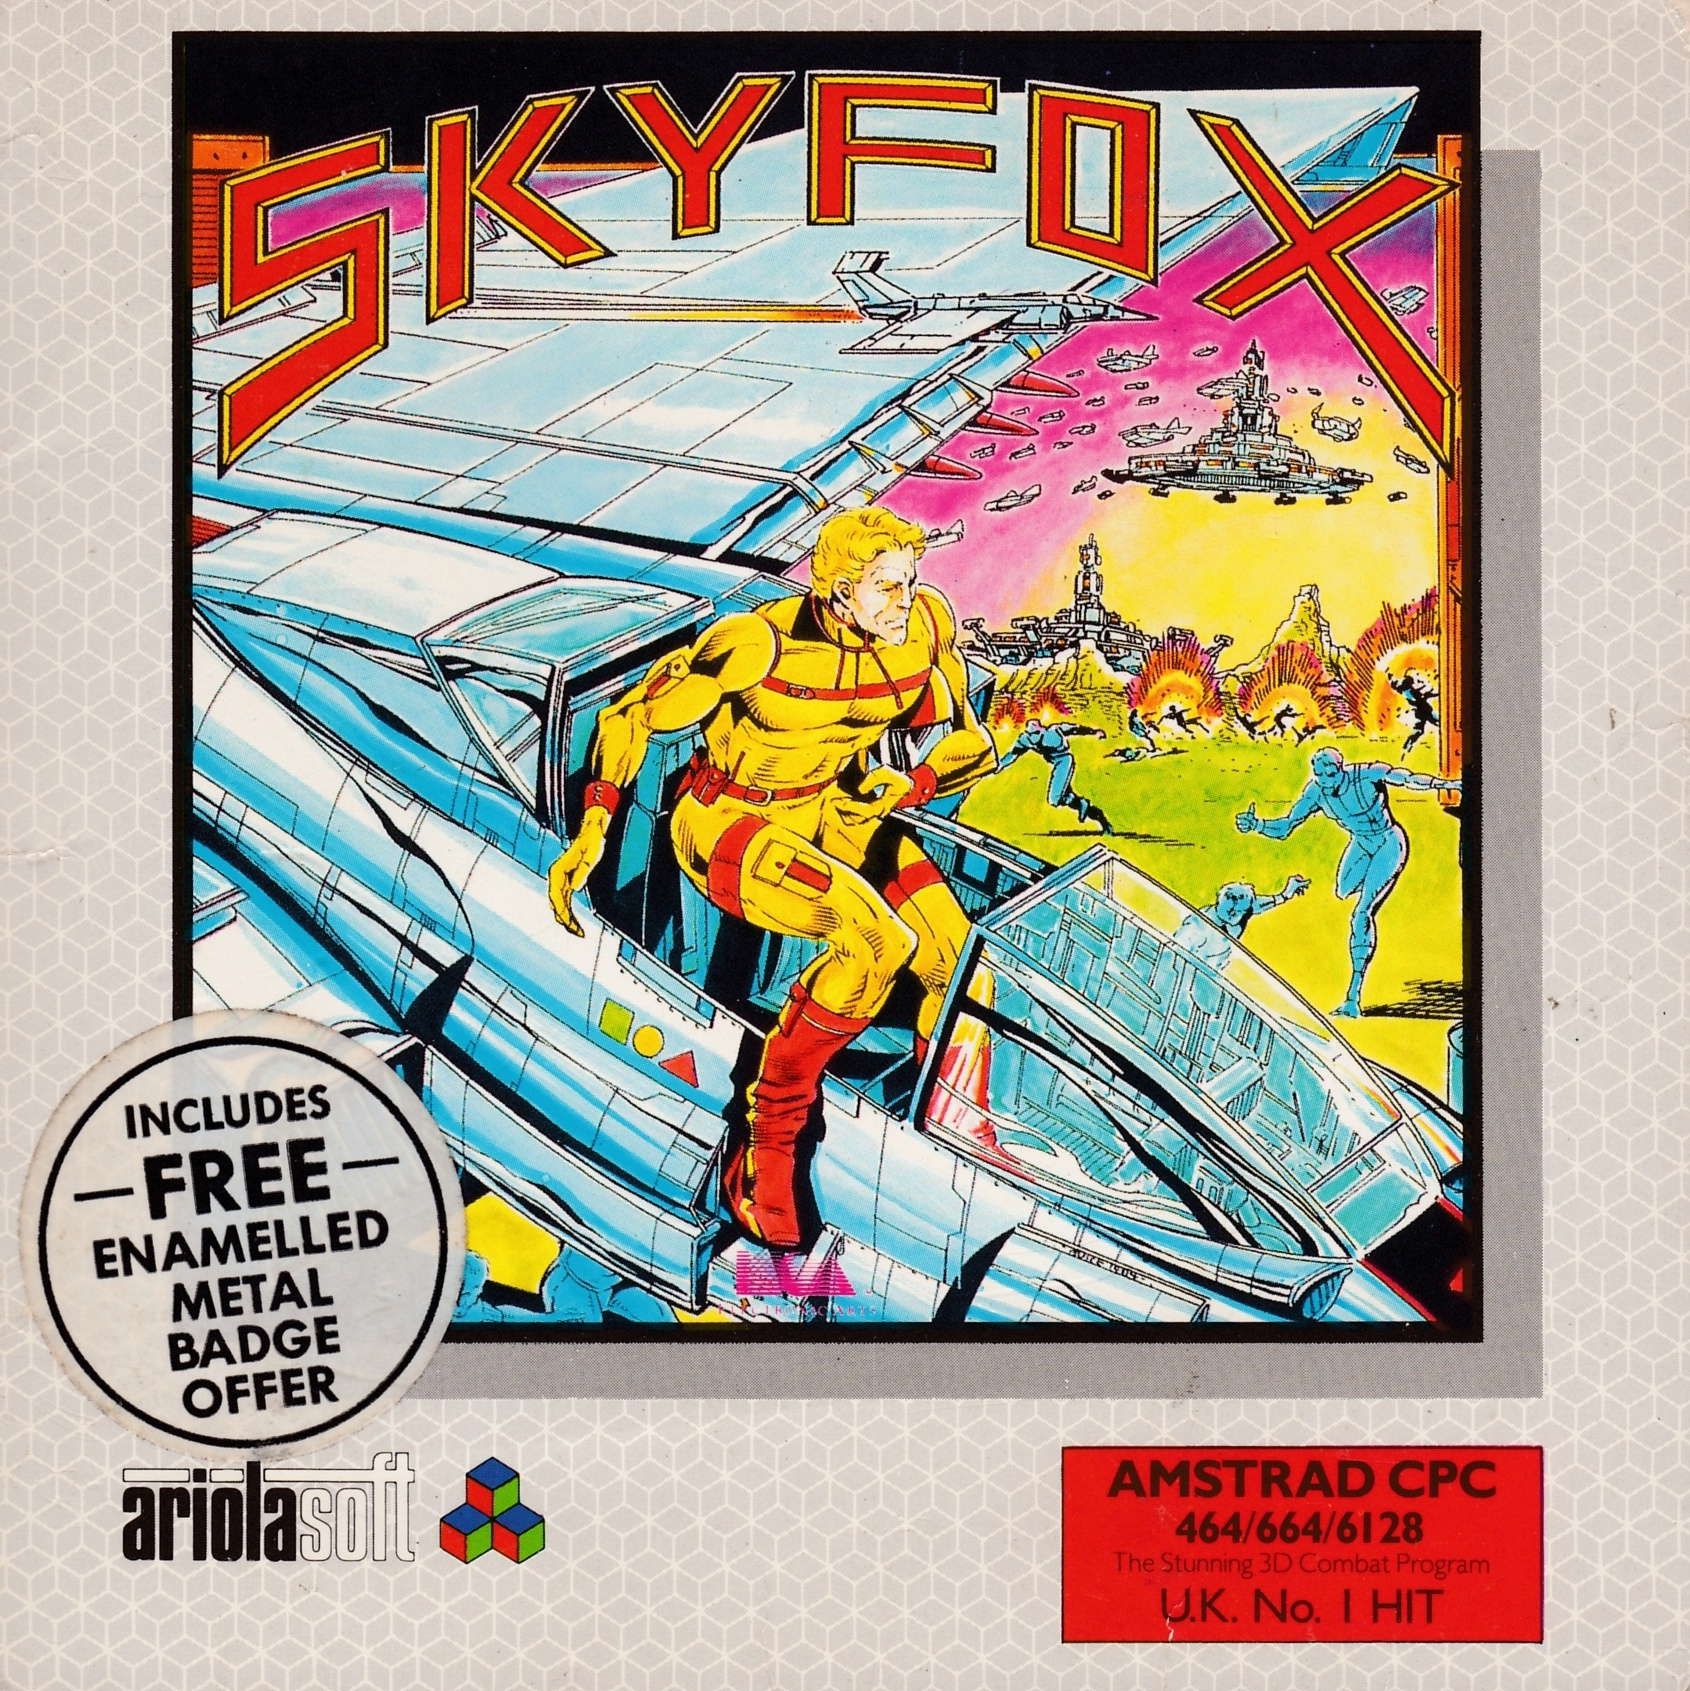 cover of the Amstrad CPC game Skyfox  by GameBase CPC